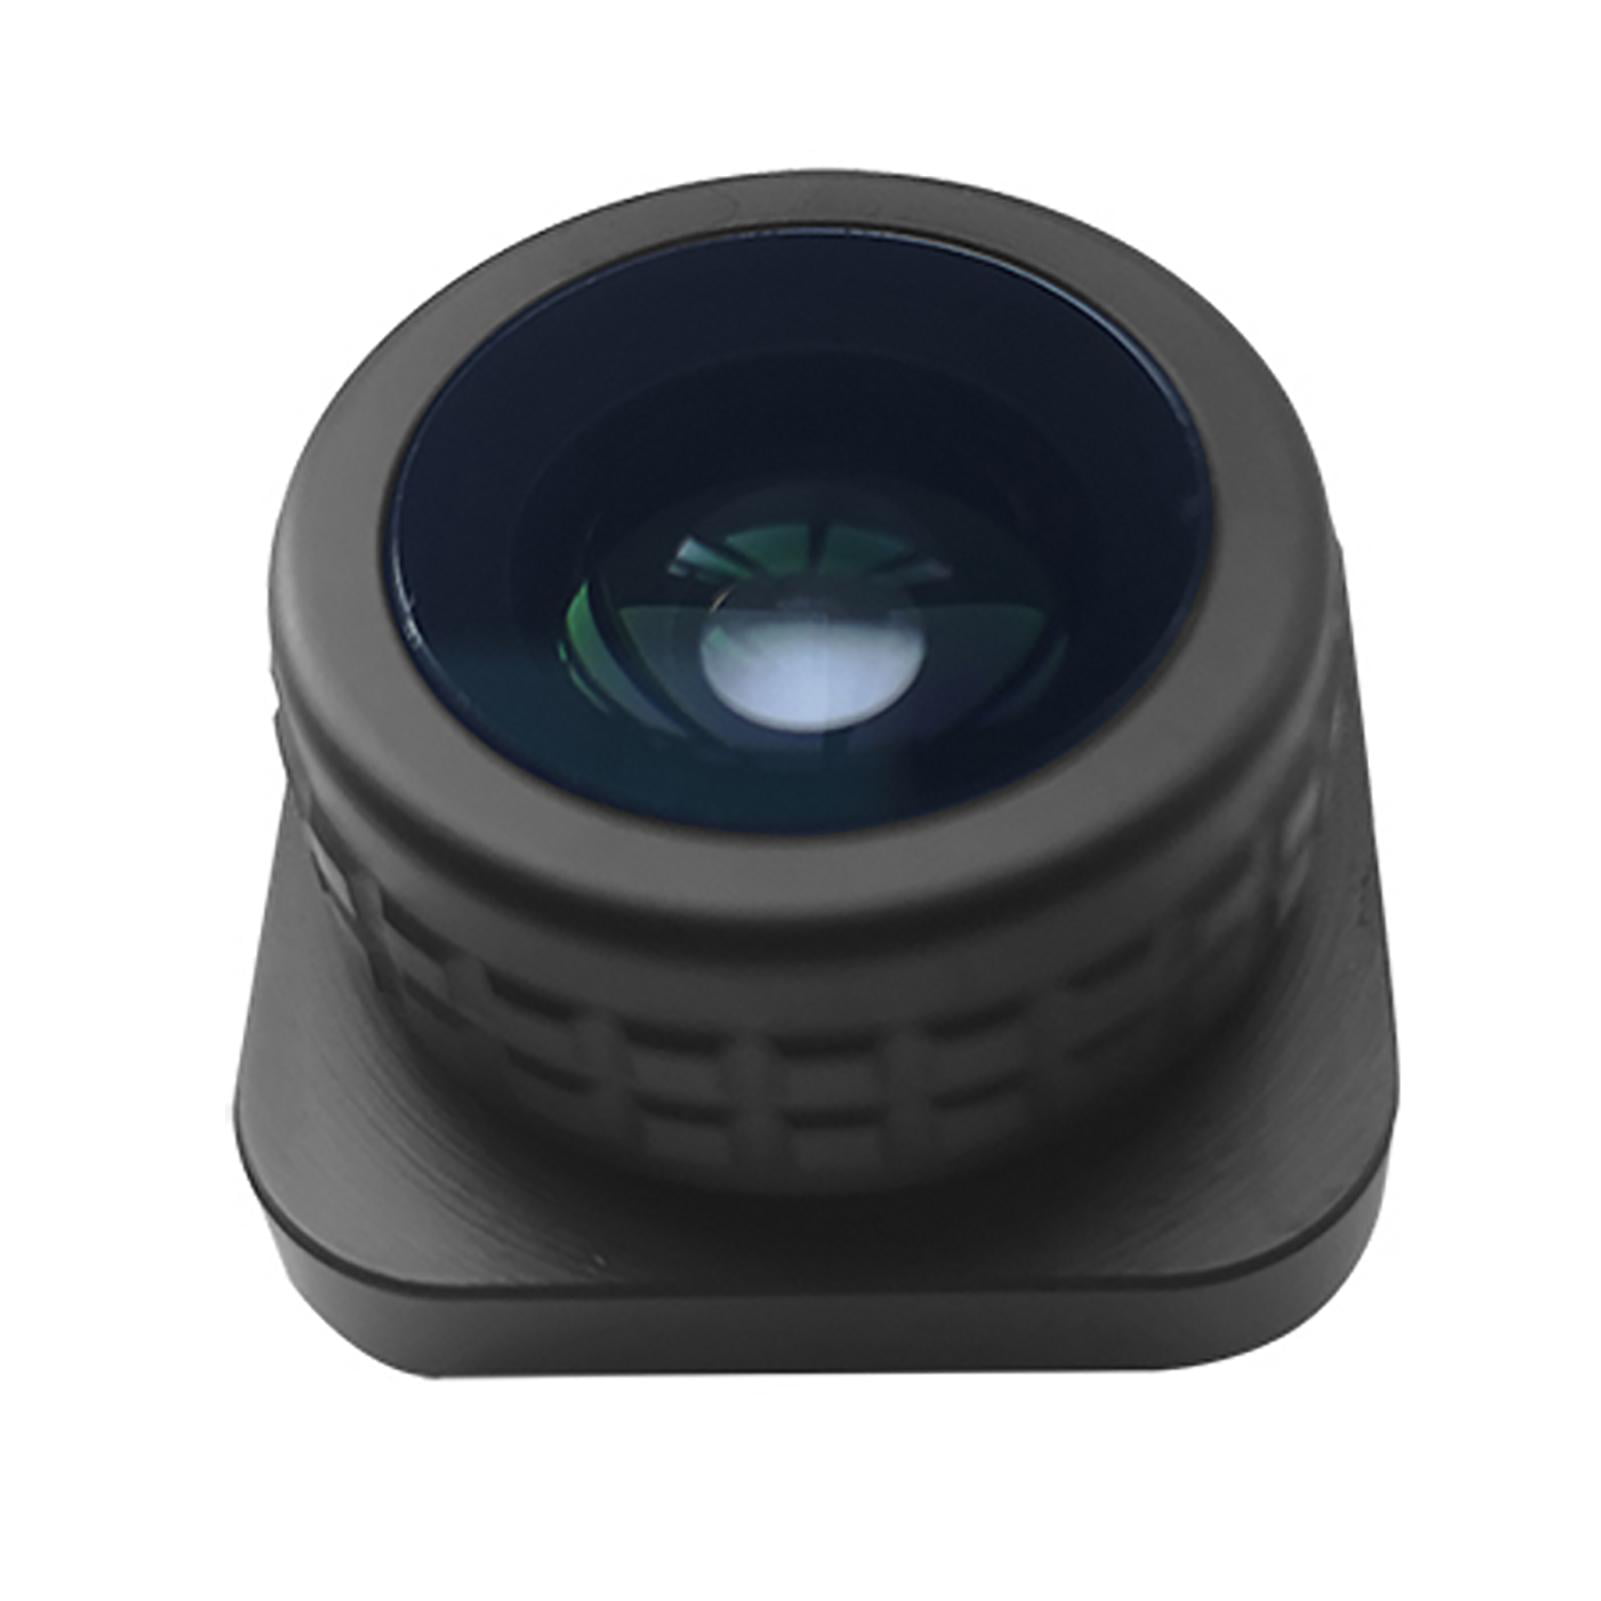 Camera Fisheye Lens 180° High and Wide Field of Viewing Optical Glass Multilayer Coating FisheyeLens for GoPro Hero 9